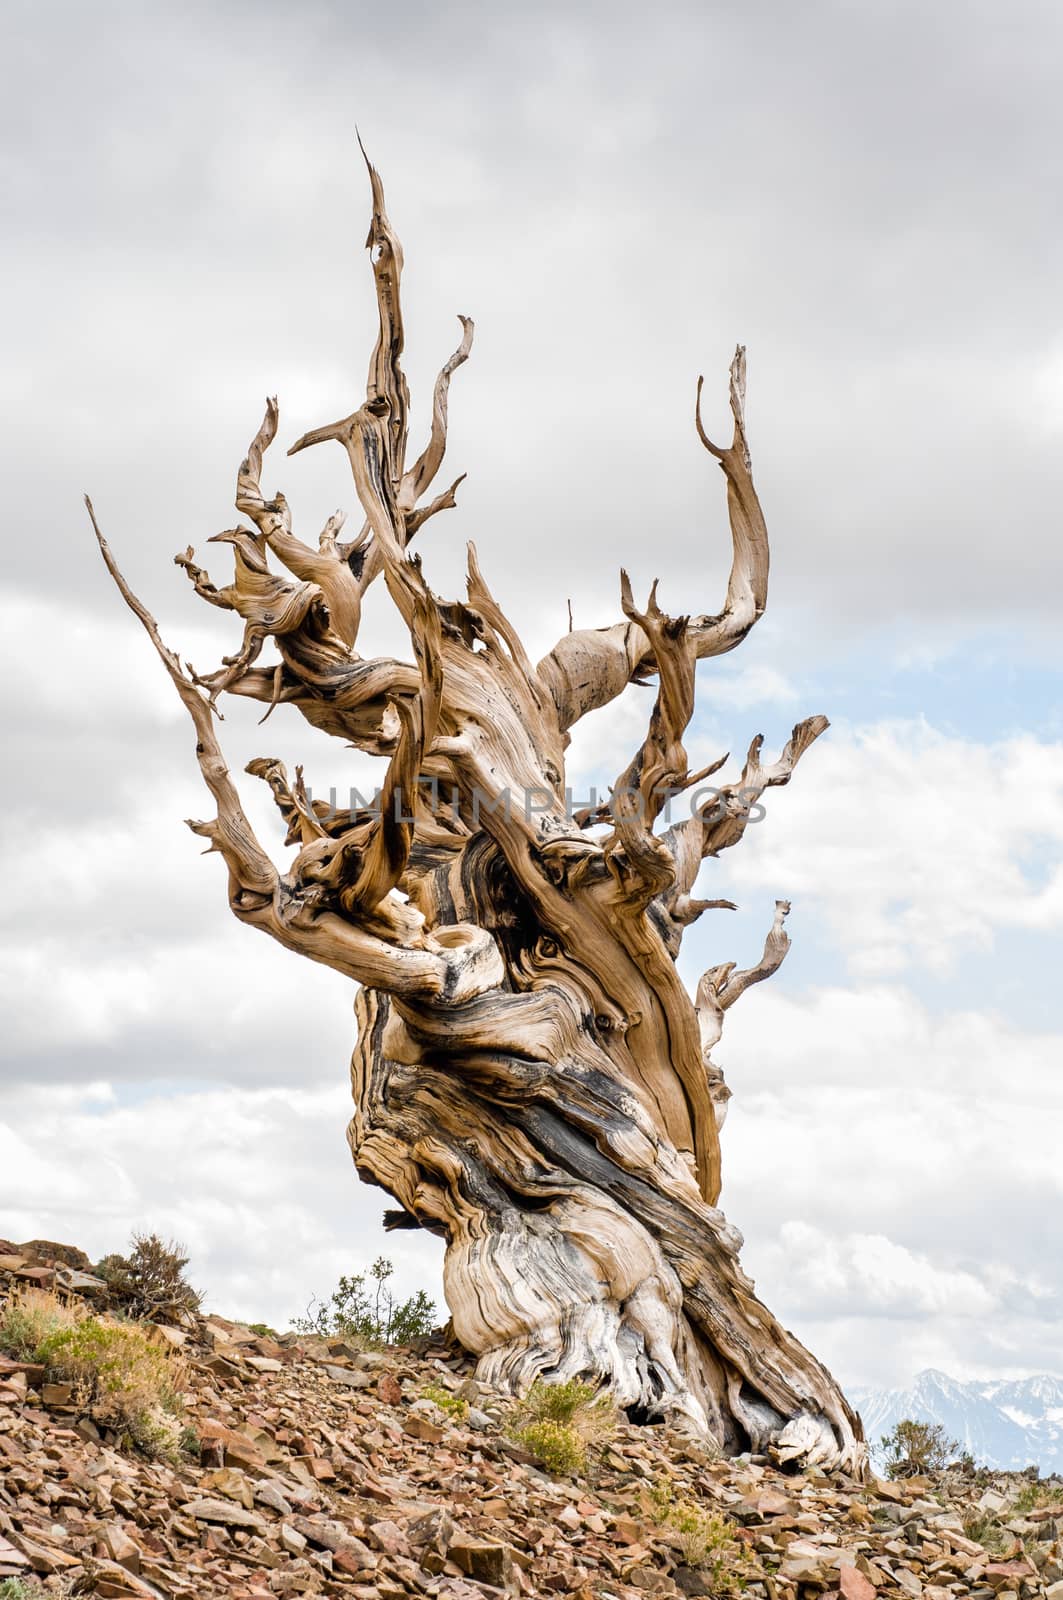 Great Basin Bristlecone Pine (Pinus longaeva) in Ancient Bristlecone Pine Forest in the White Mountains of Inyo County, CA by Njean